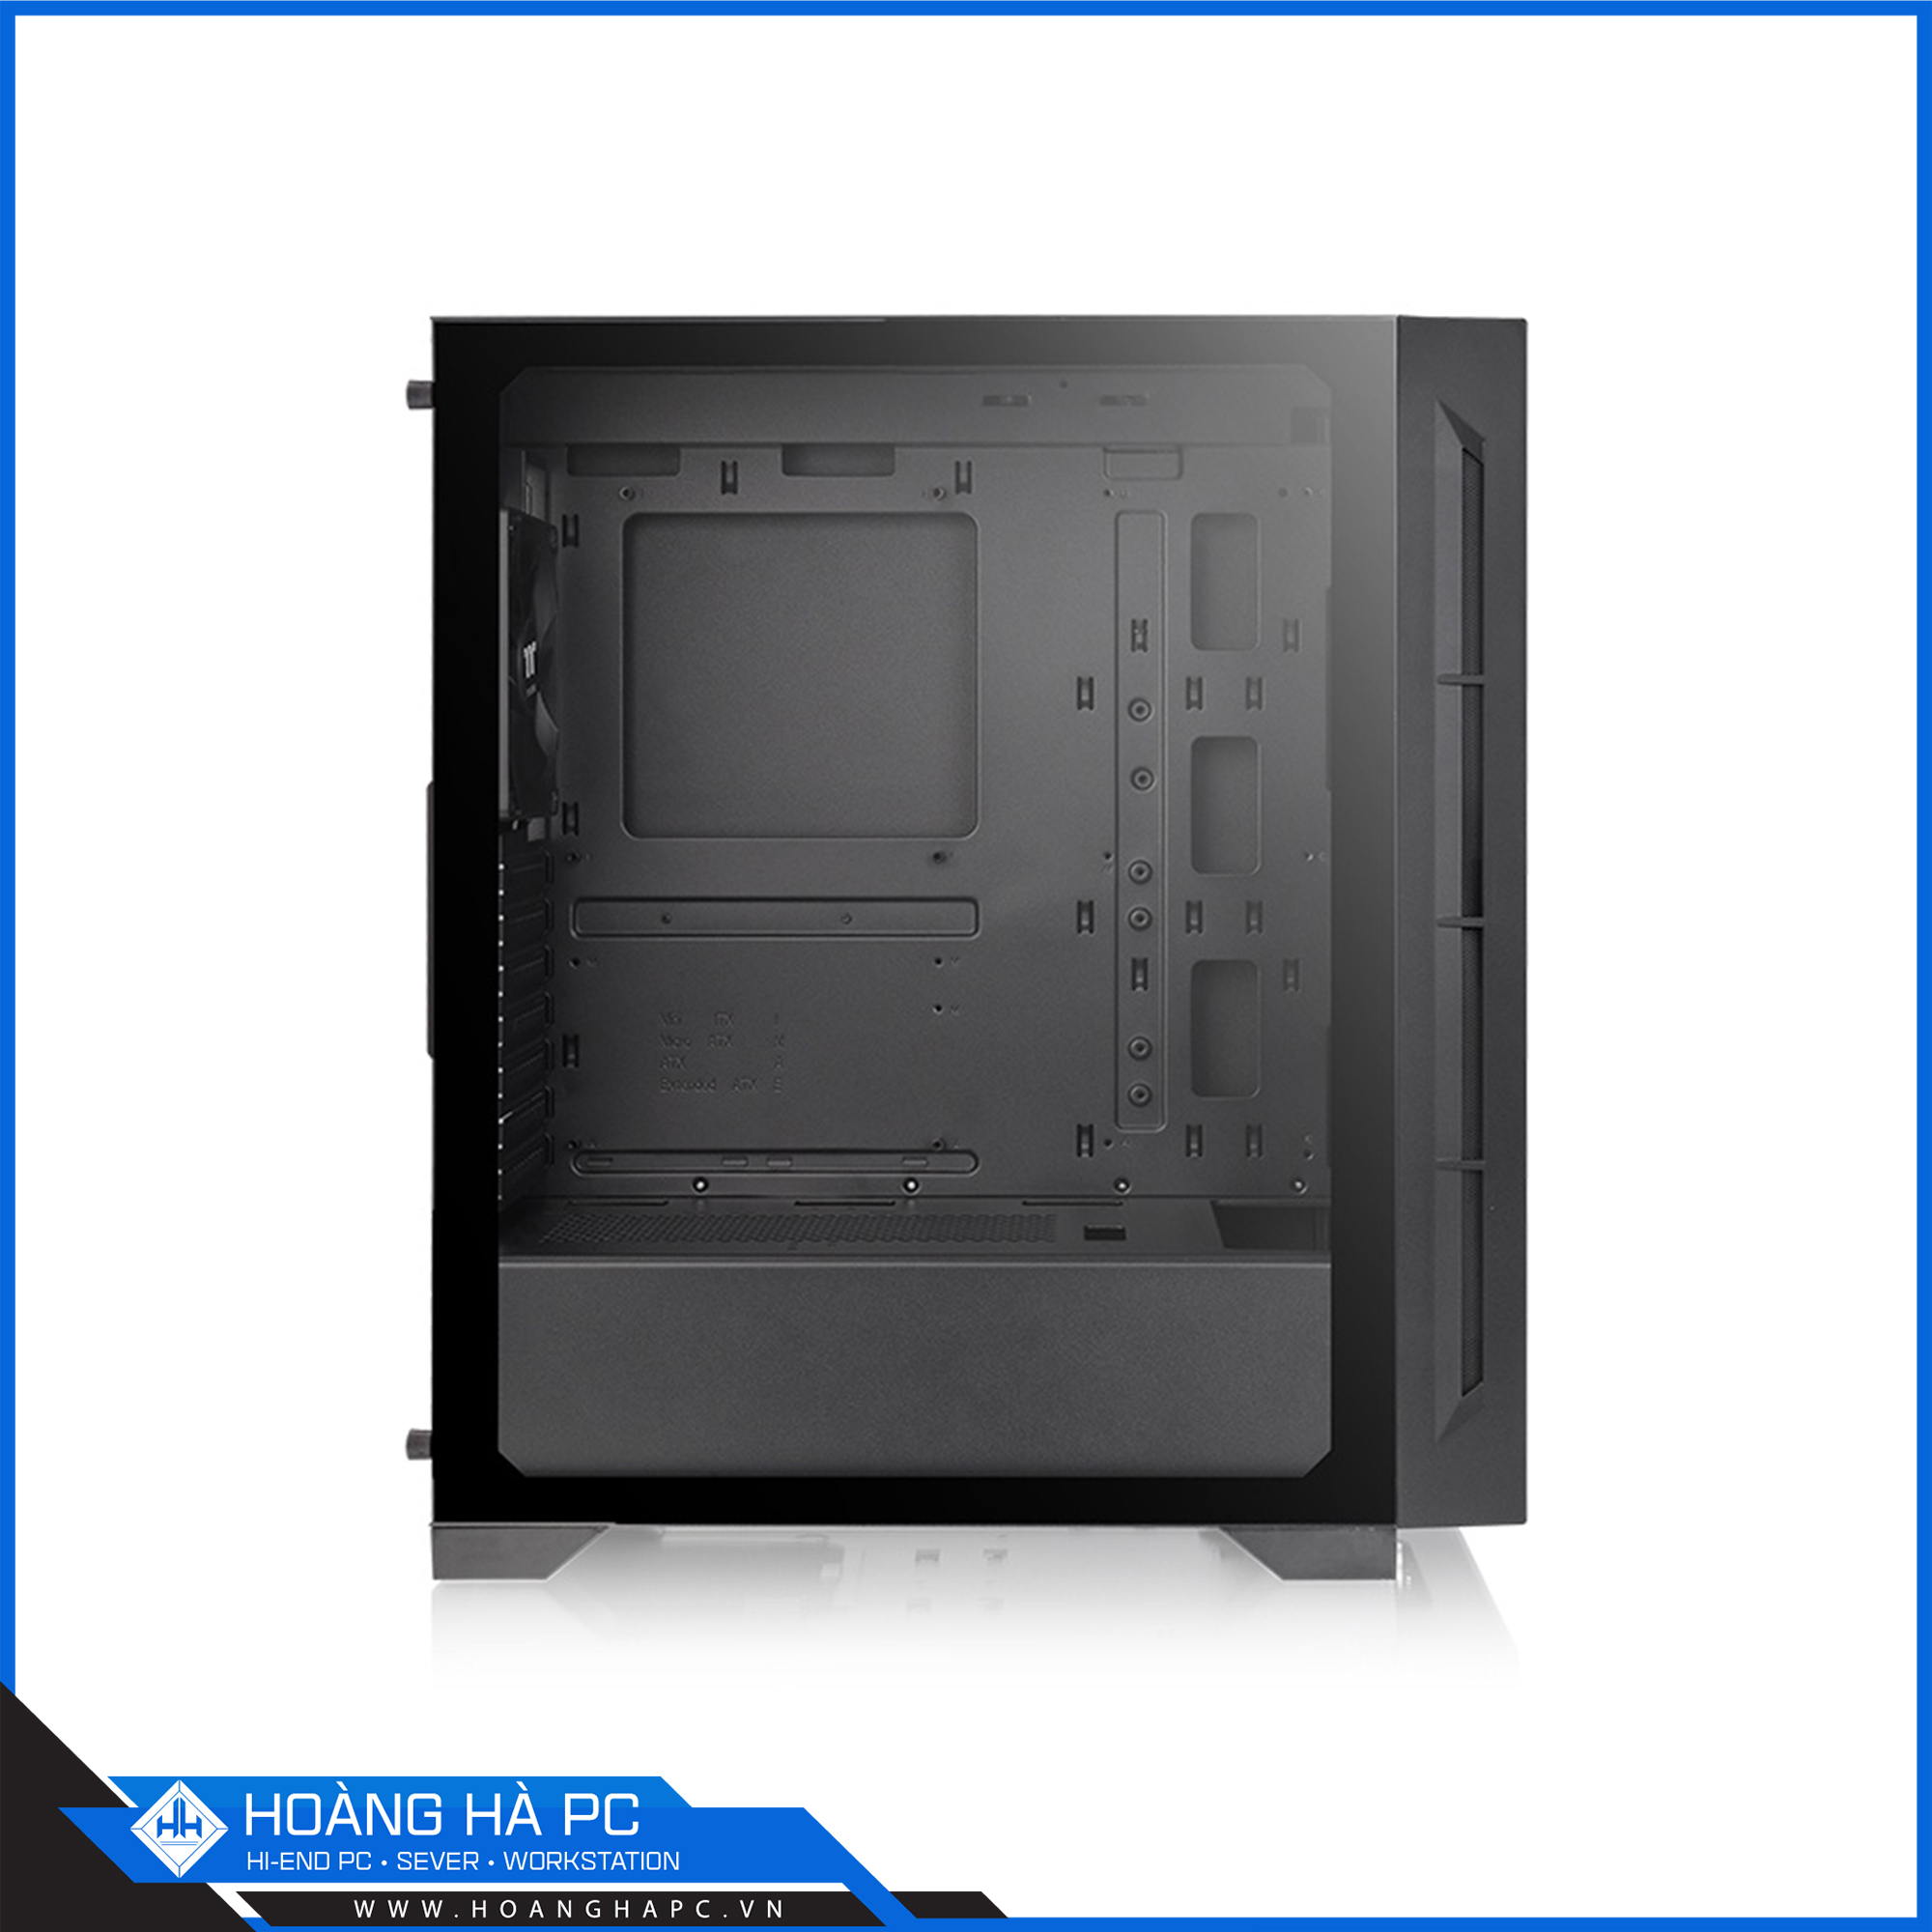 Vỏ Case THERMALTAKE H330 Tempered Glass (Mid Tower/Màu Đen)